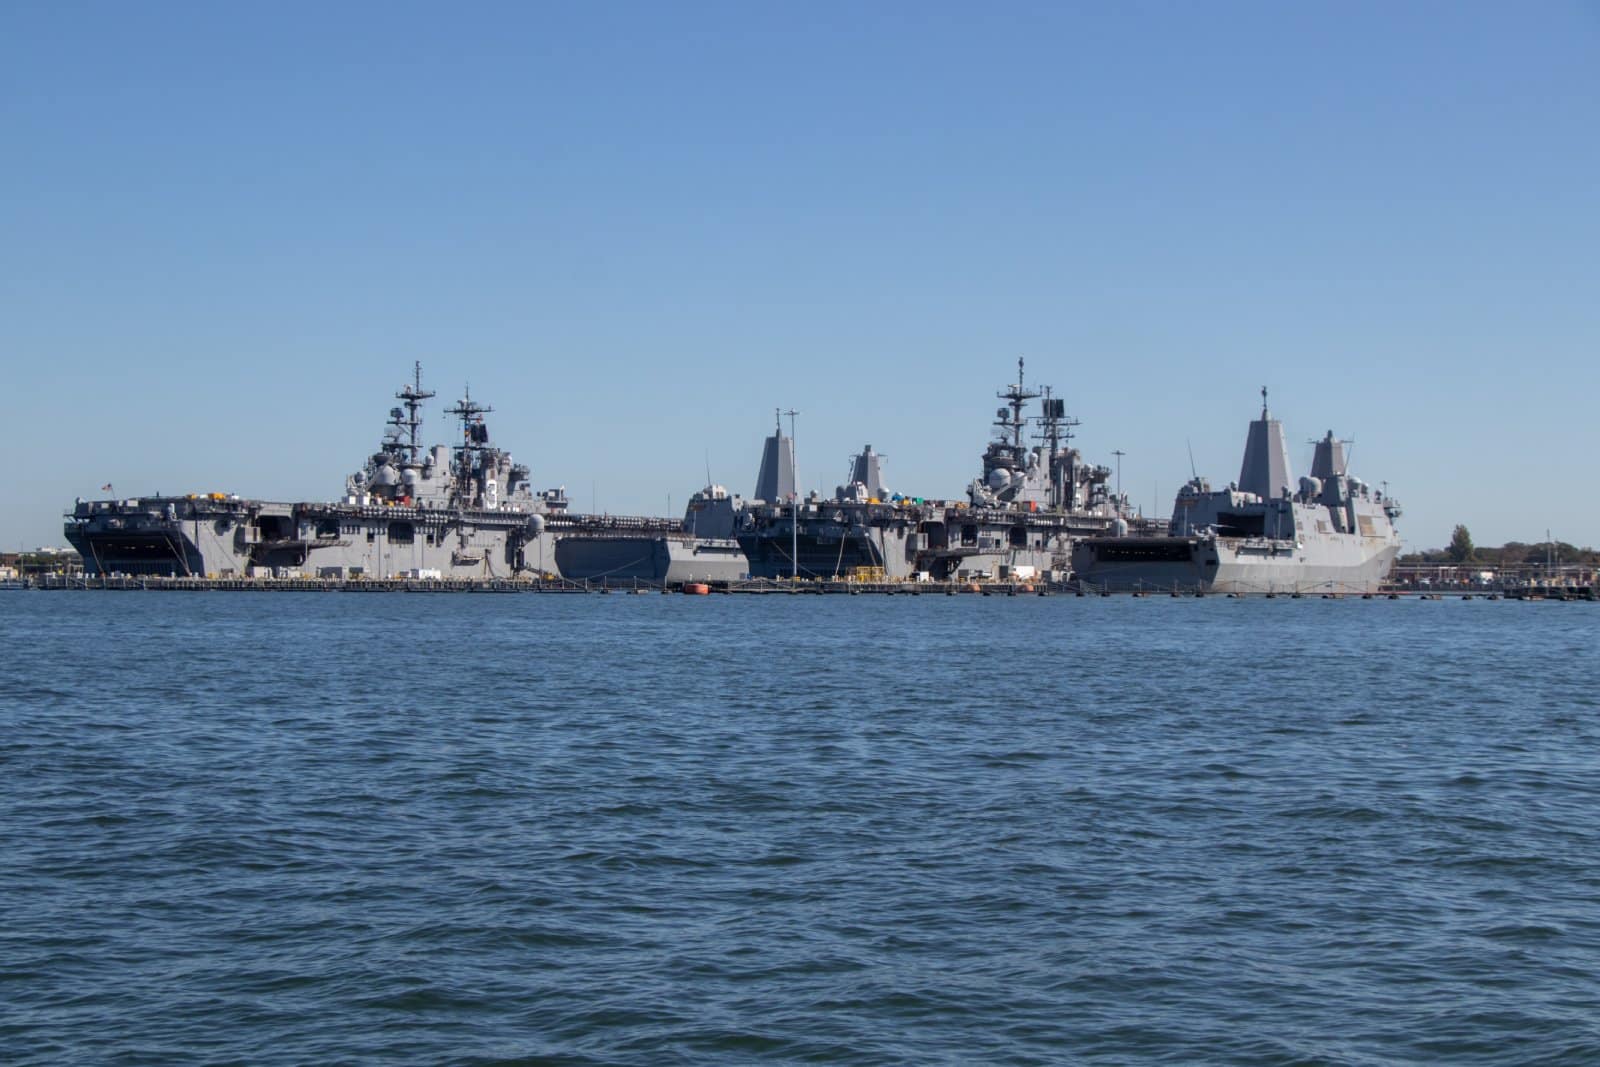 <p class="wp-caption-text">Image Credit: Shutterstock / Lynda McFaul</p>  <p>The world’s largest naval station, Norfolk provides a close look at the might of the U.S. Navy and its role in global defense today.</p>